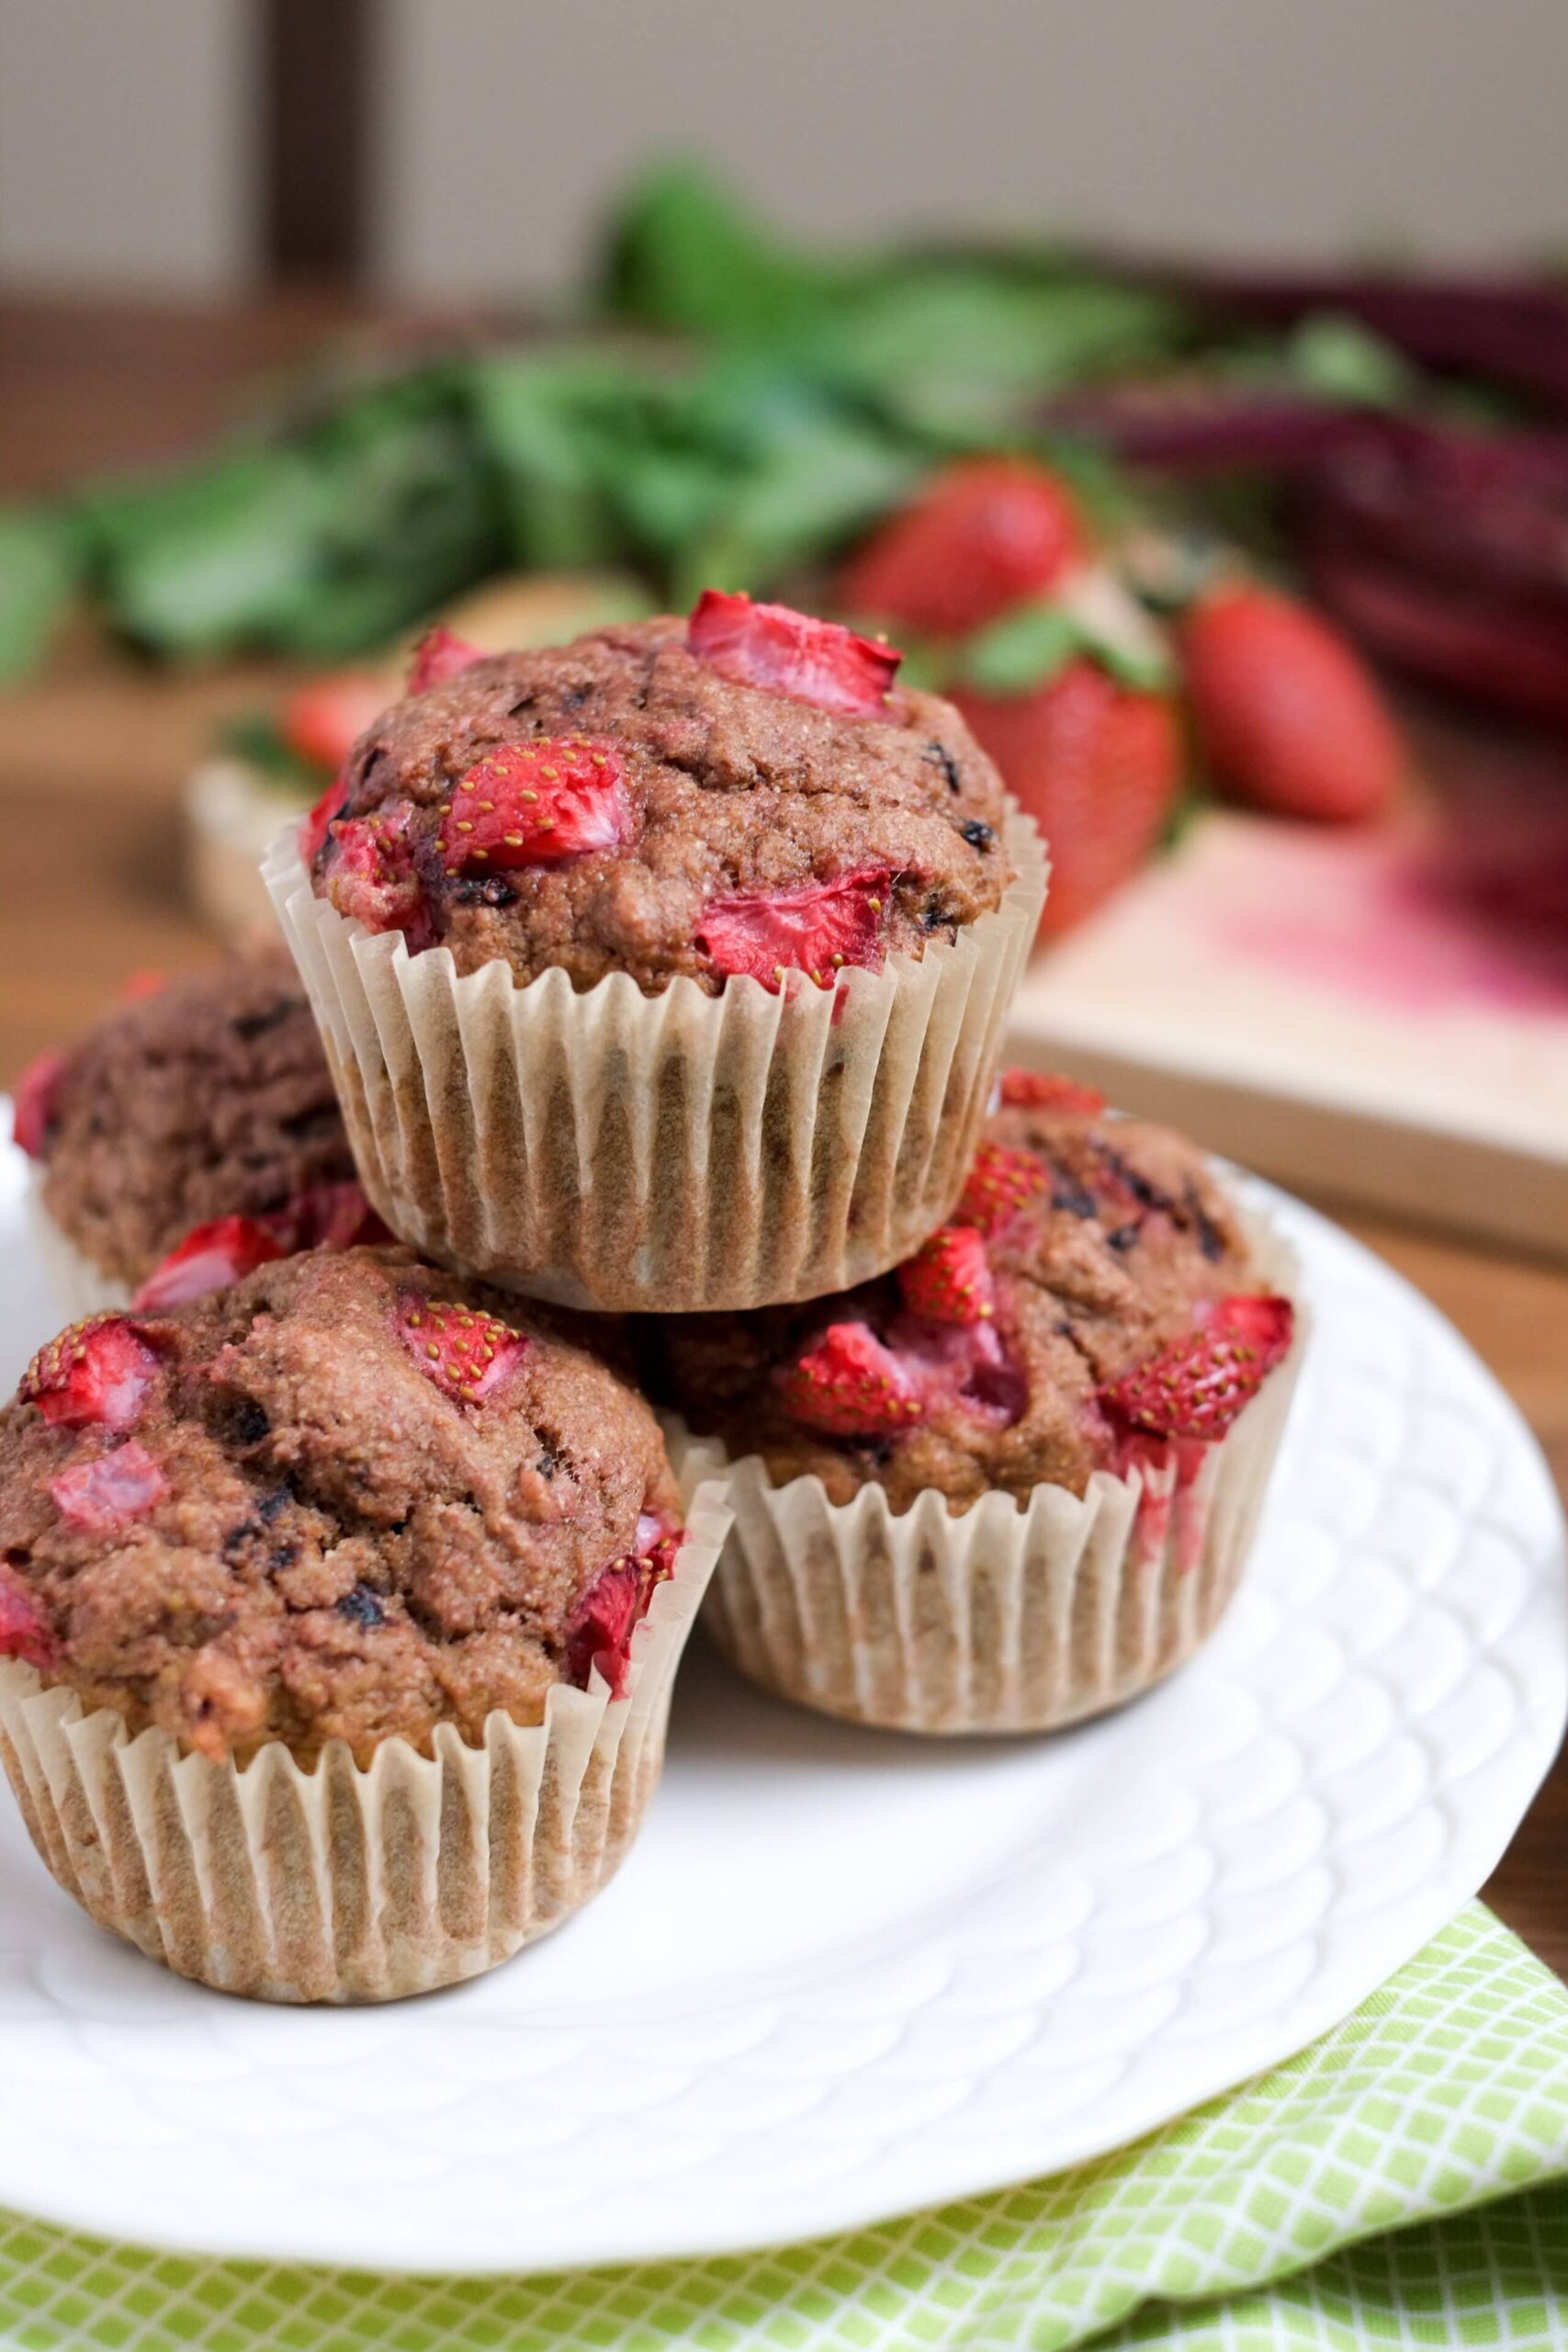 Strawberry beet muffins on a white plate.